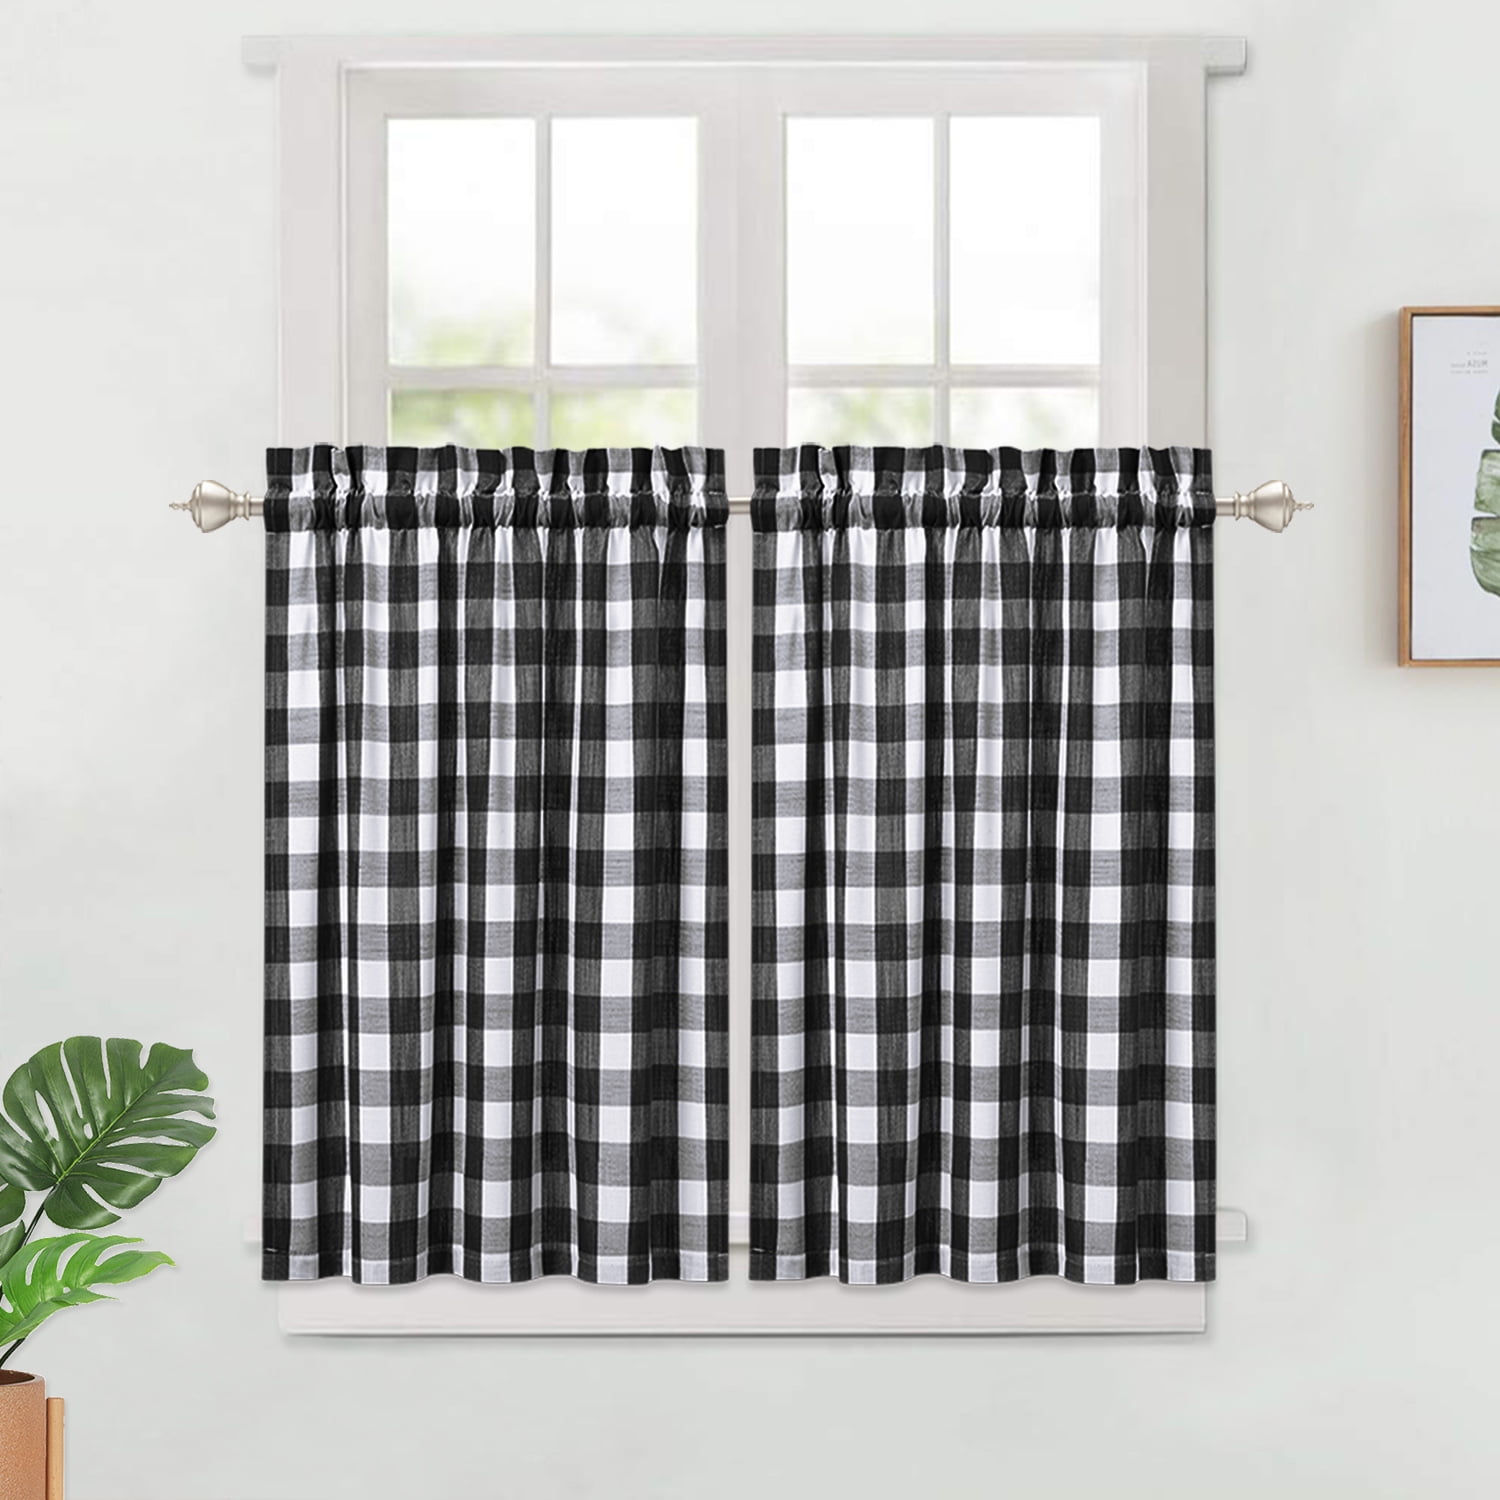 Blue Blue and White Buffalo Plaid Gingham Check Short Half Window Tier Curtains for Kitchen Bathroom Window Curtain CAROMIO Cafe Curtains 24 Inch